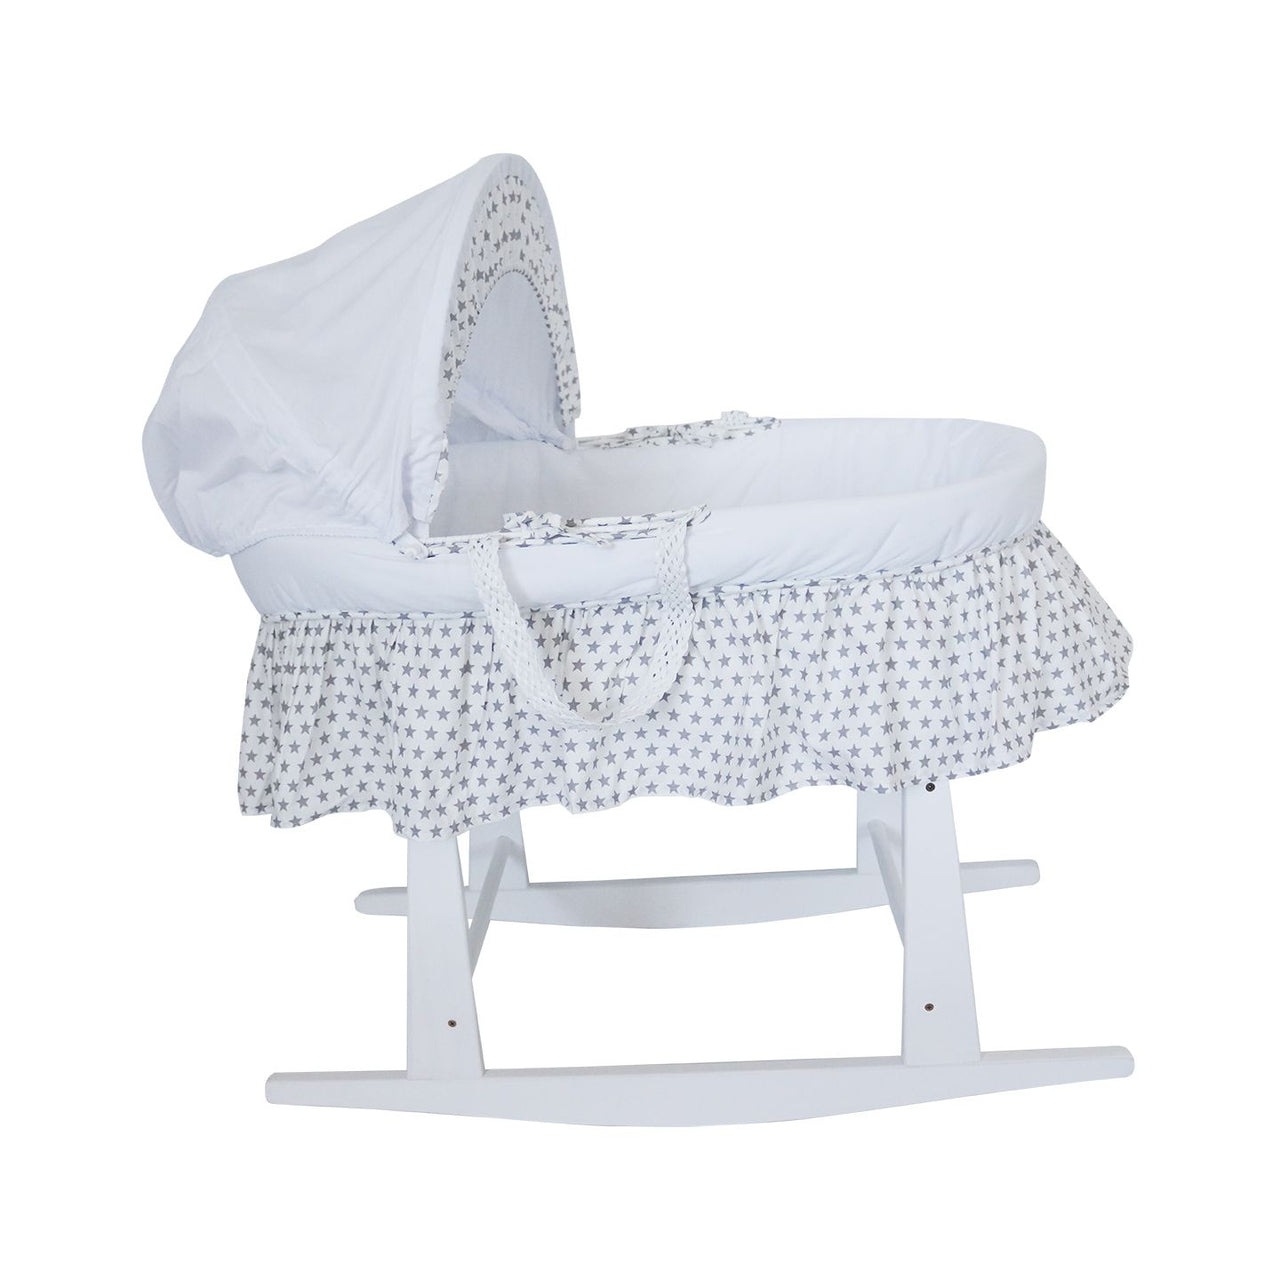 Moses Basket and Stand - Grey